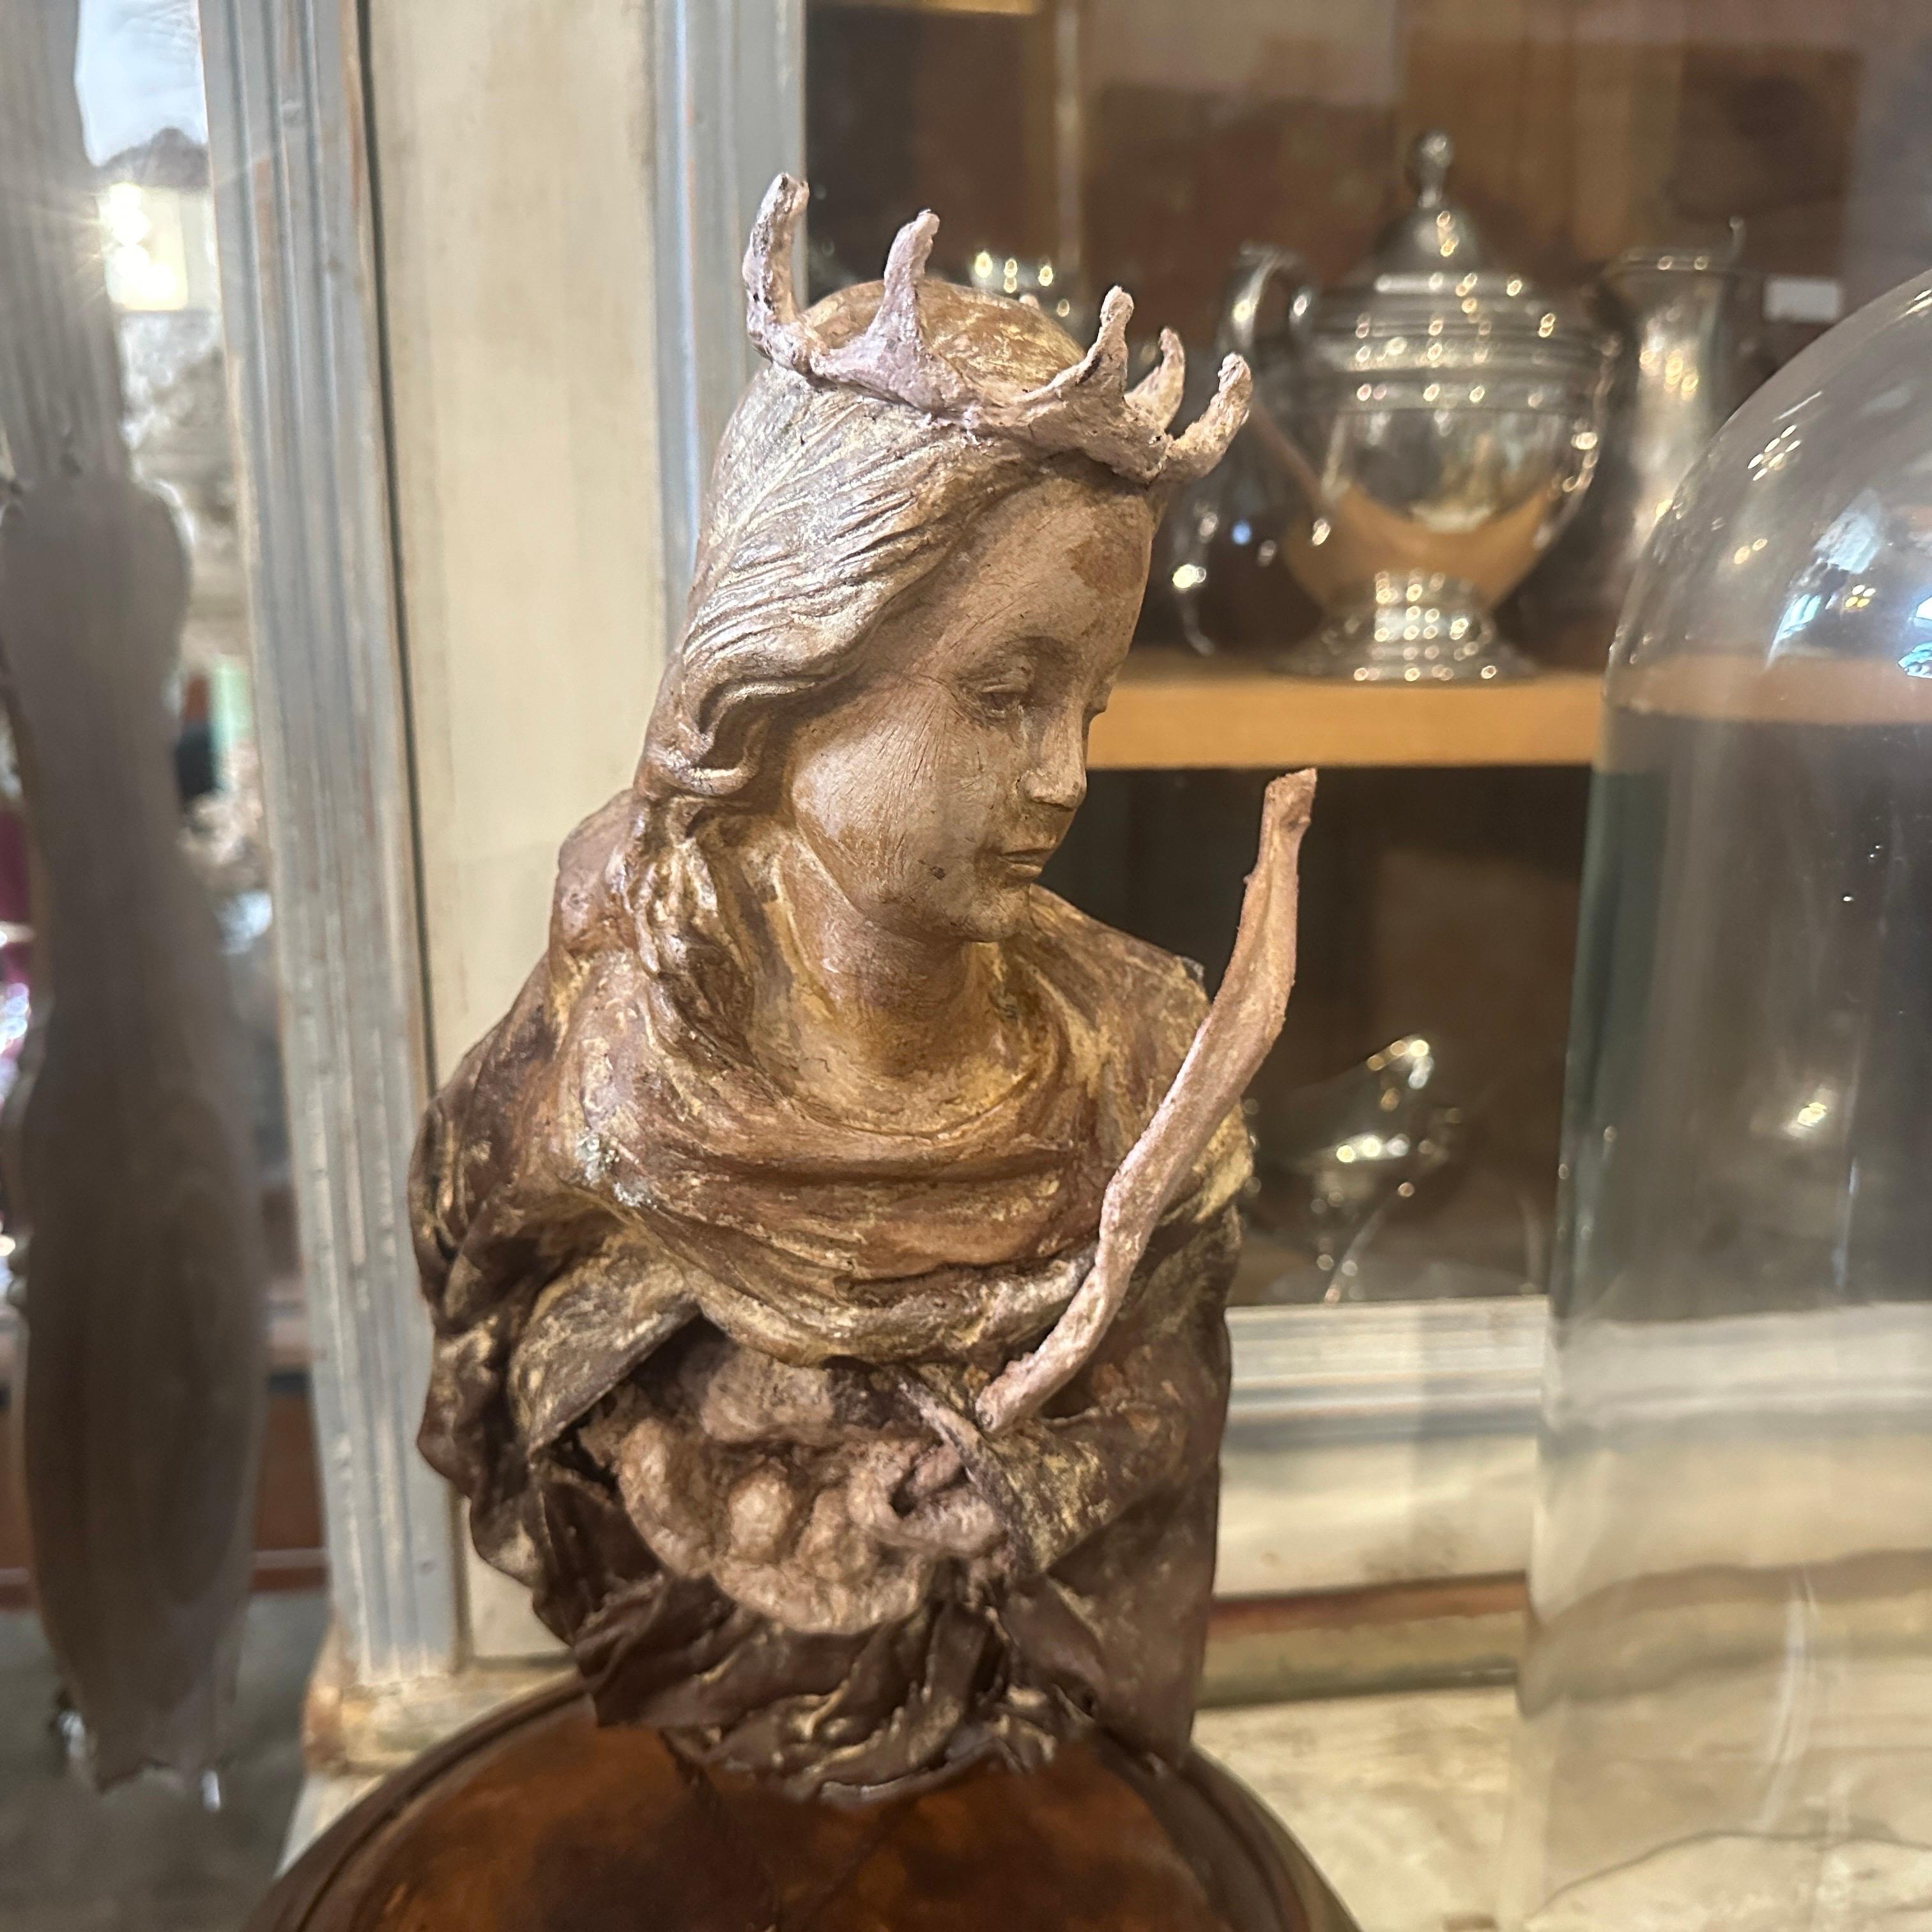 Neoclassical Revival 1930s Classical Papier Maché Sicilian Bust of St. Agata on a Glass Display Case